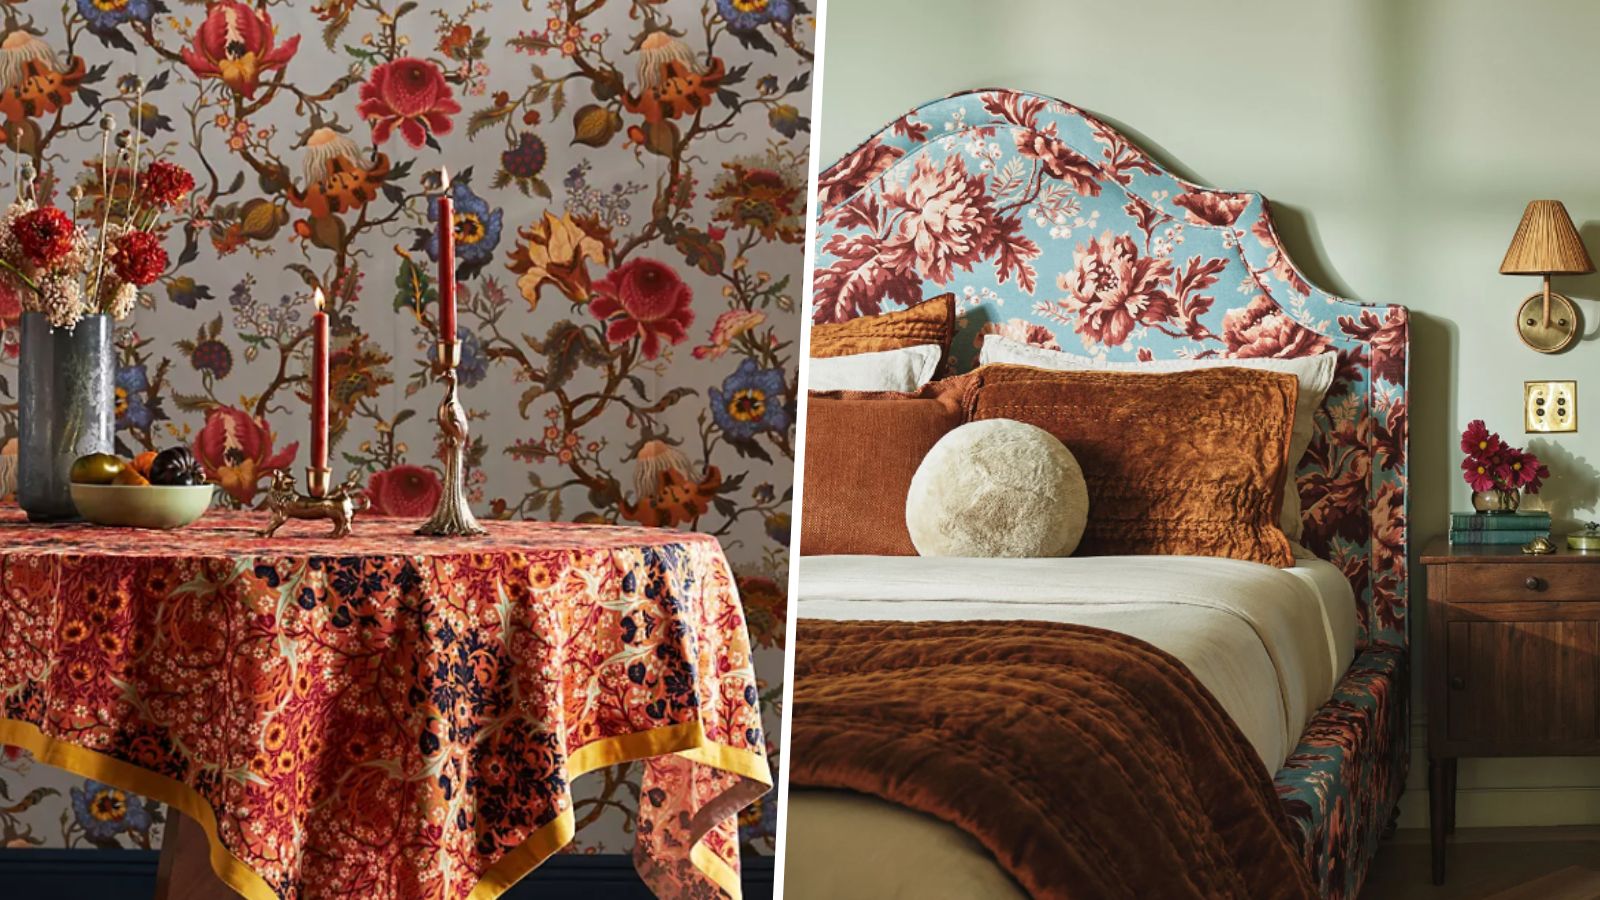 Anthropologie x House of Hackney channel ultimate maximalism |